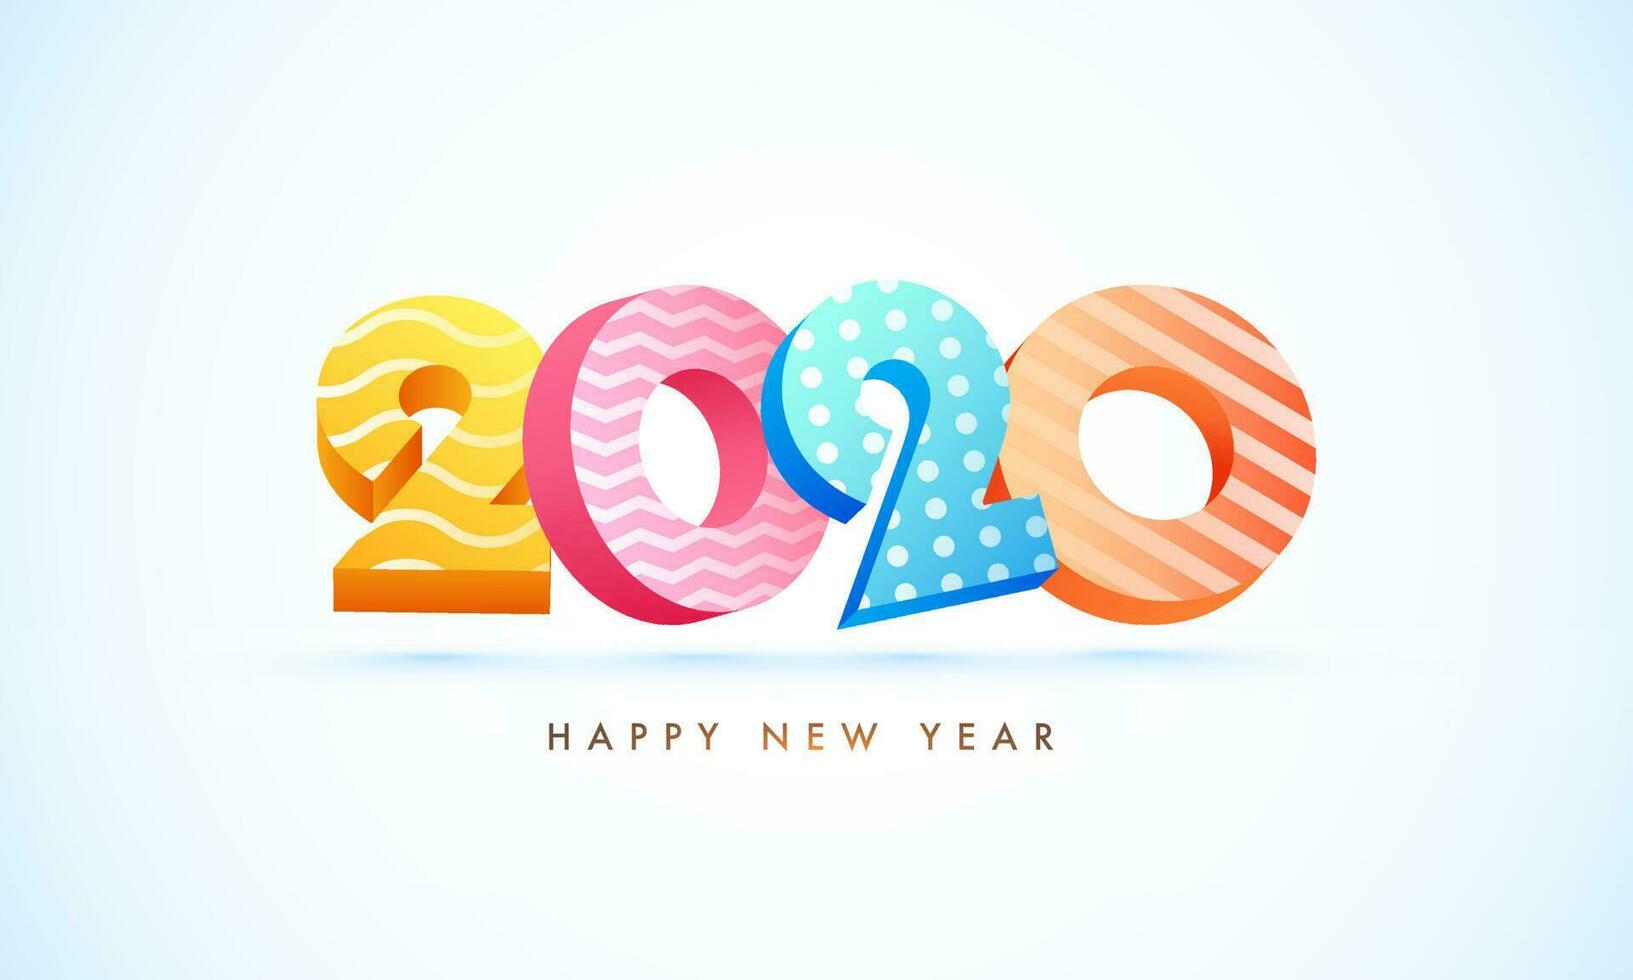 3D text of 2020 in different abstract pattern on white background for Happy New Year celebration. vector